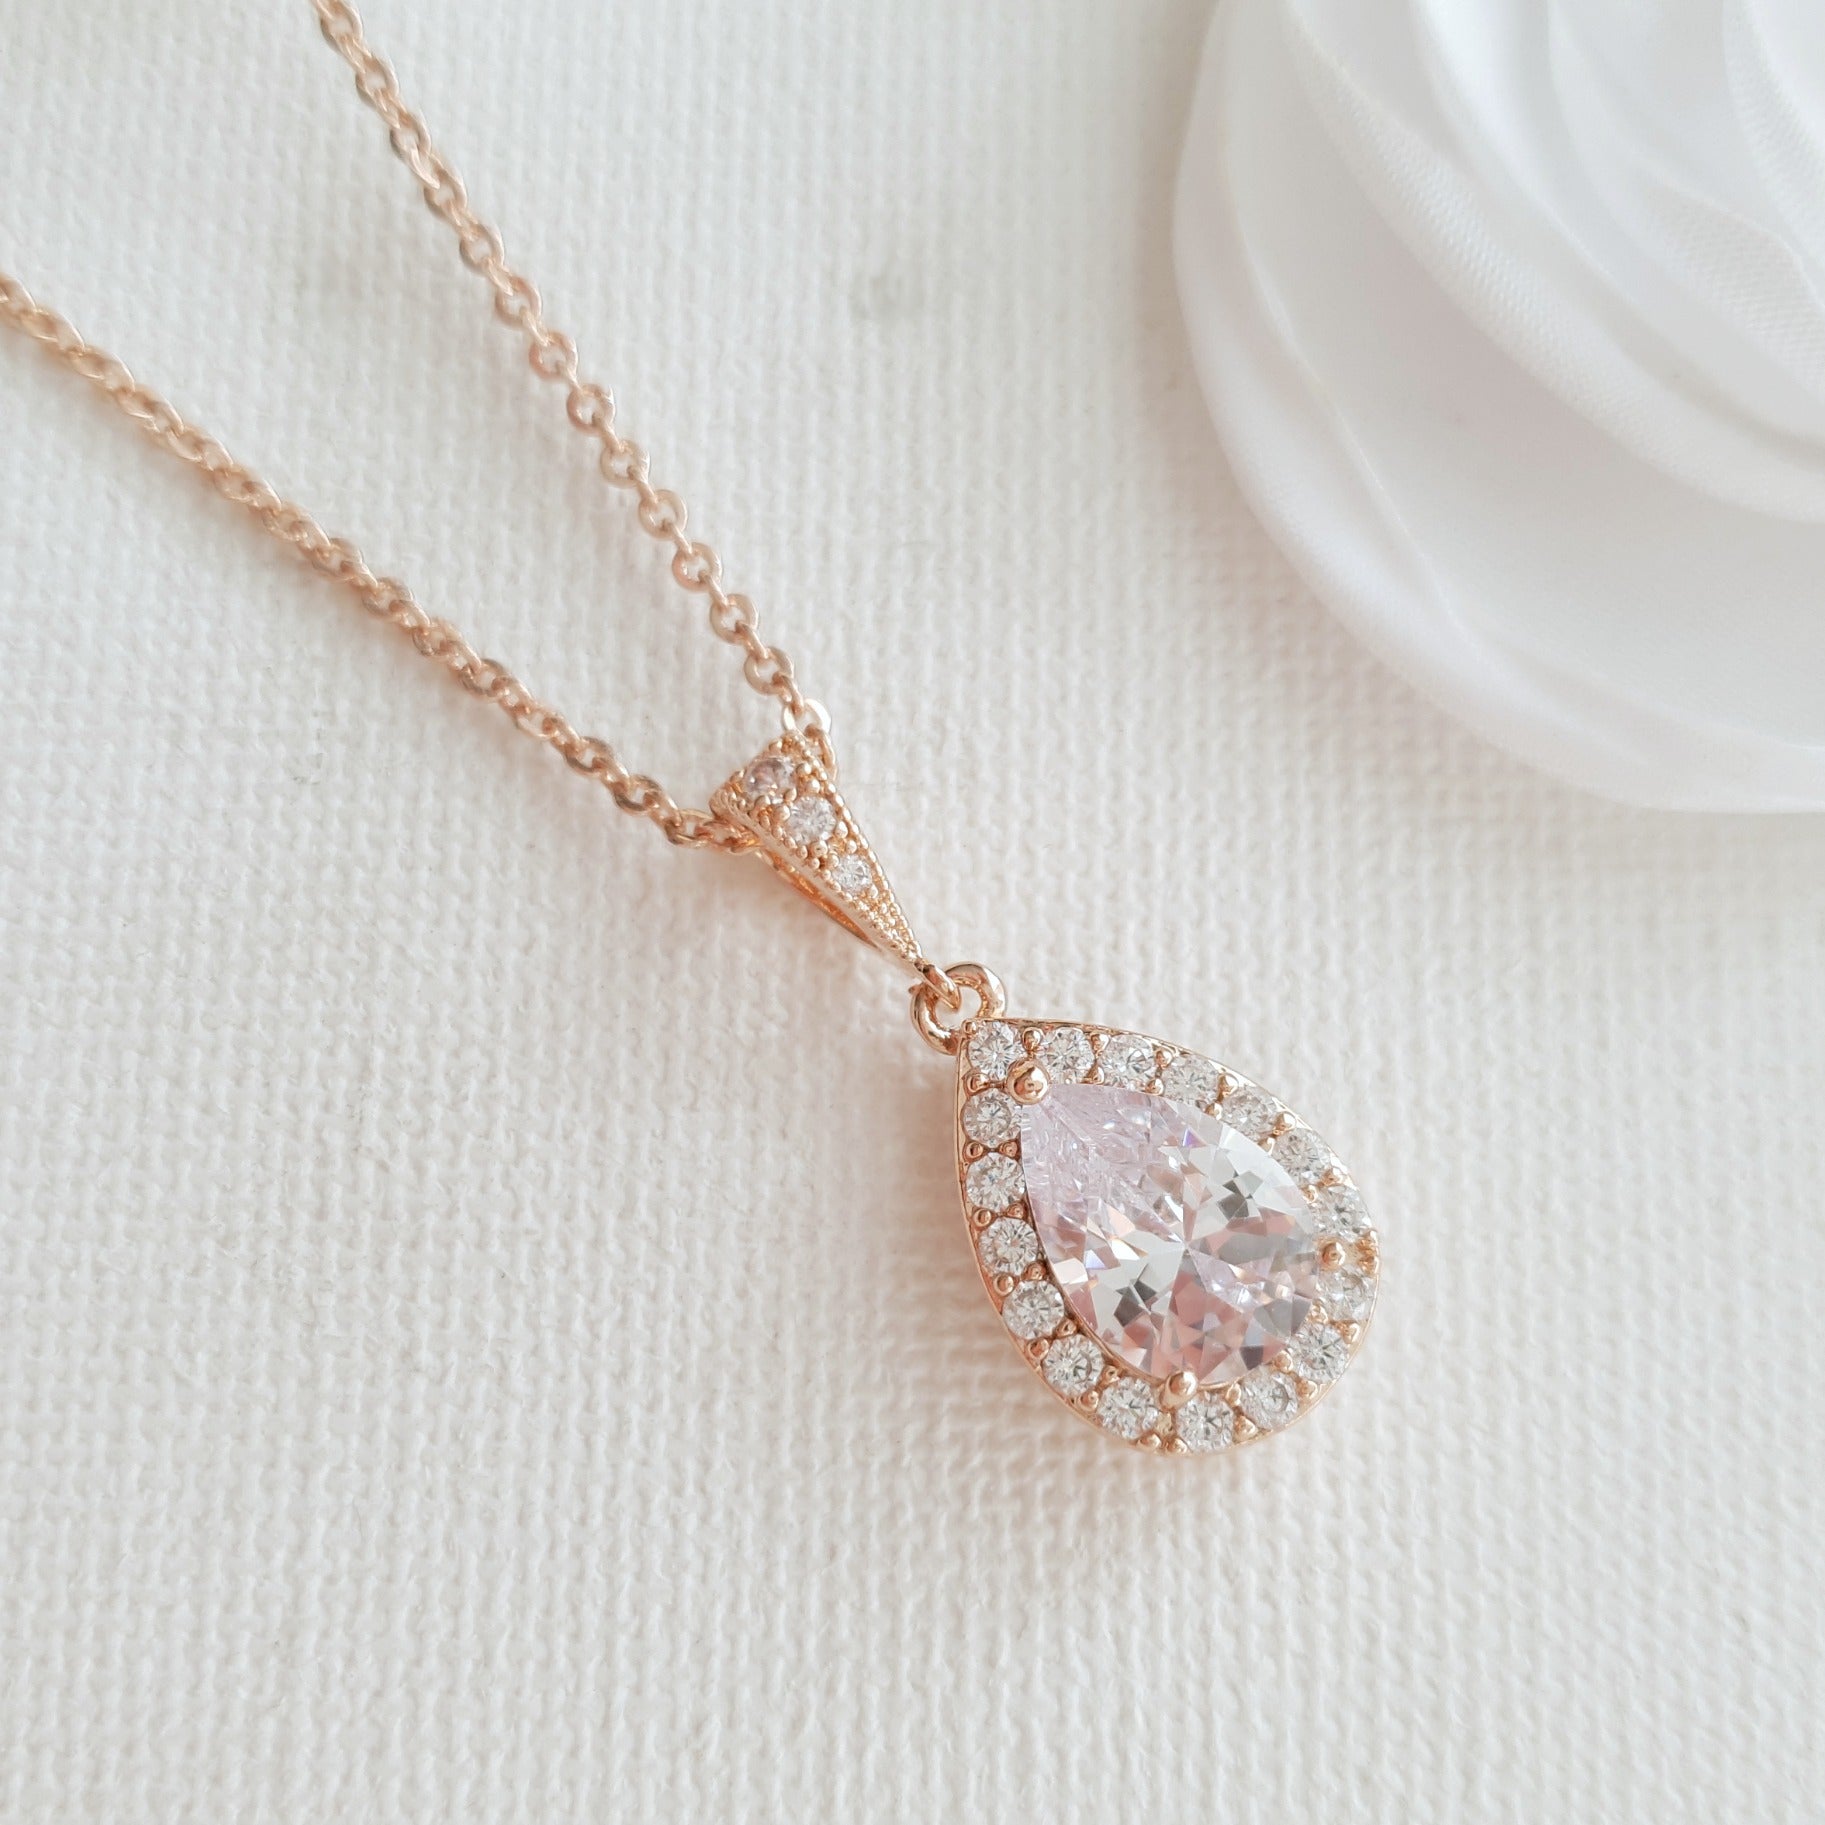 Rose Gold Necklace with Small Teardrop Pendant for Weddings & to Gift ...